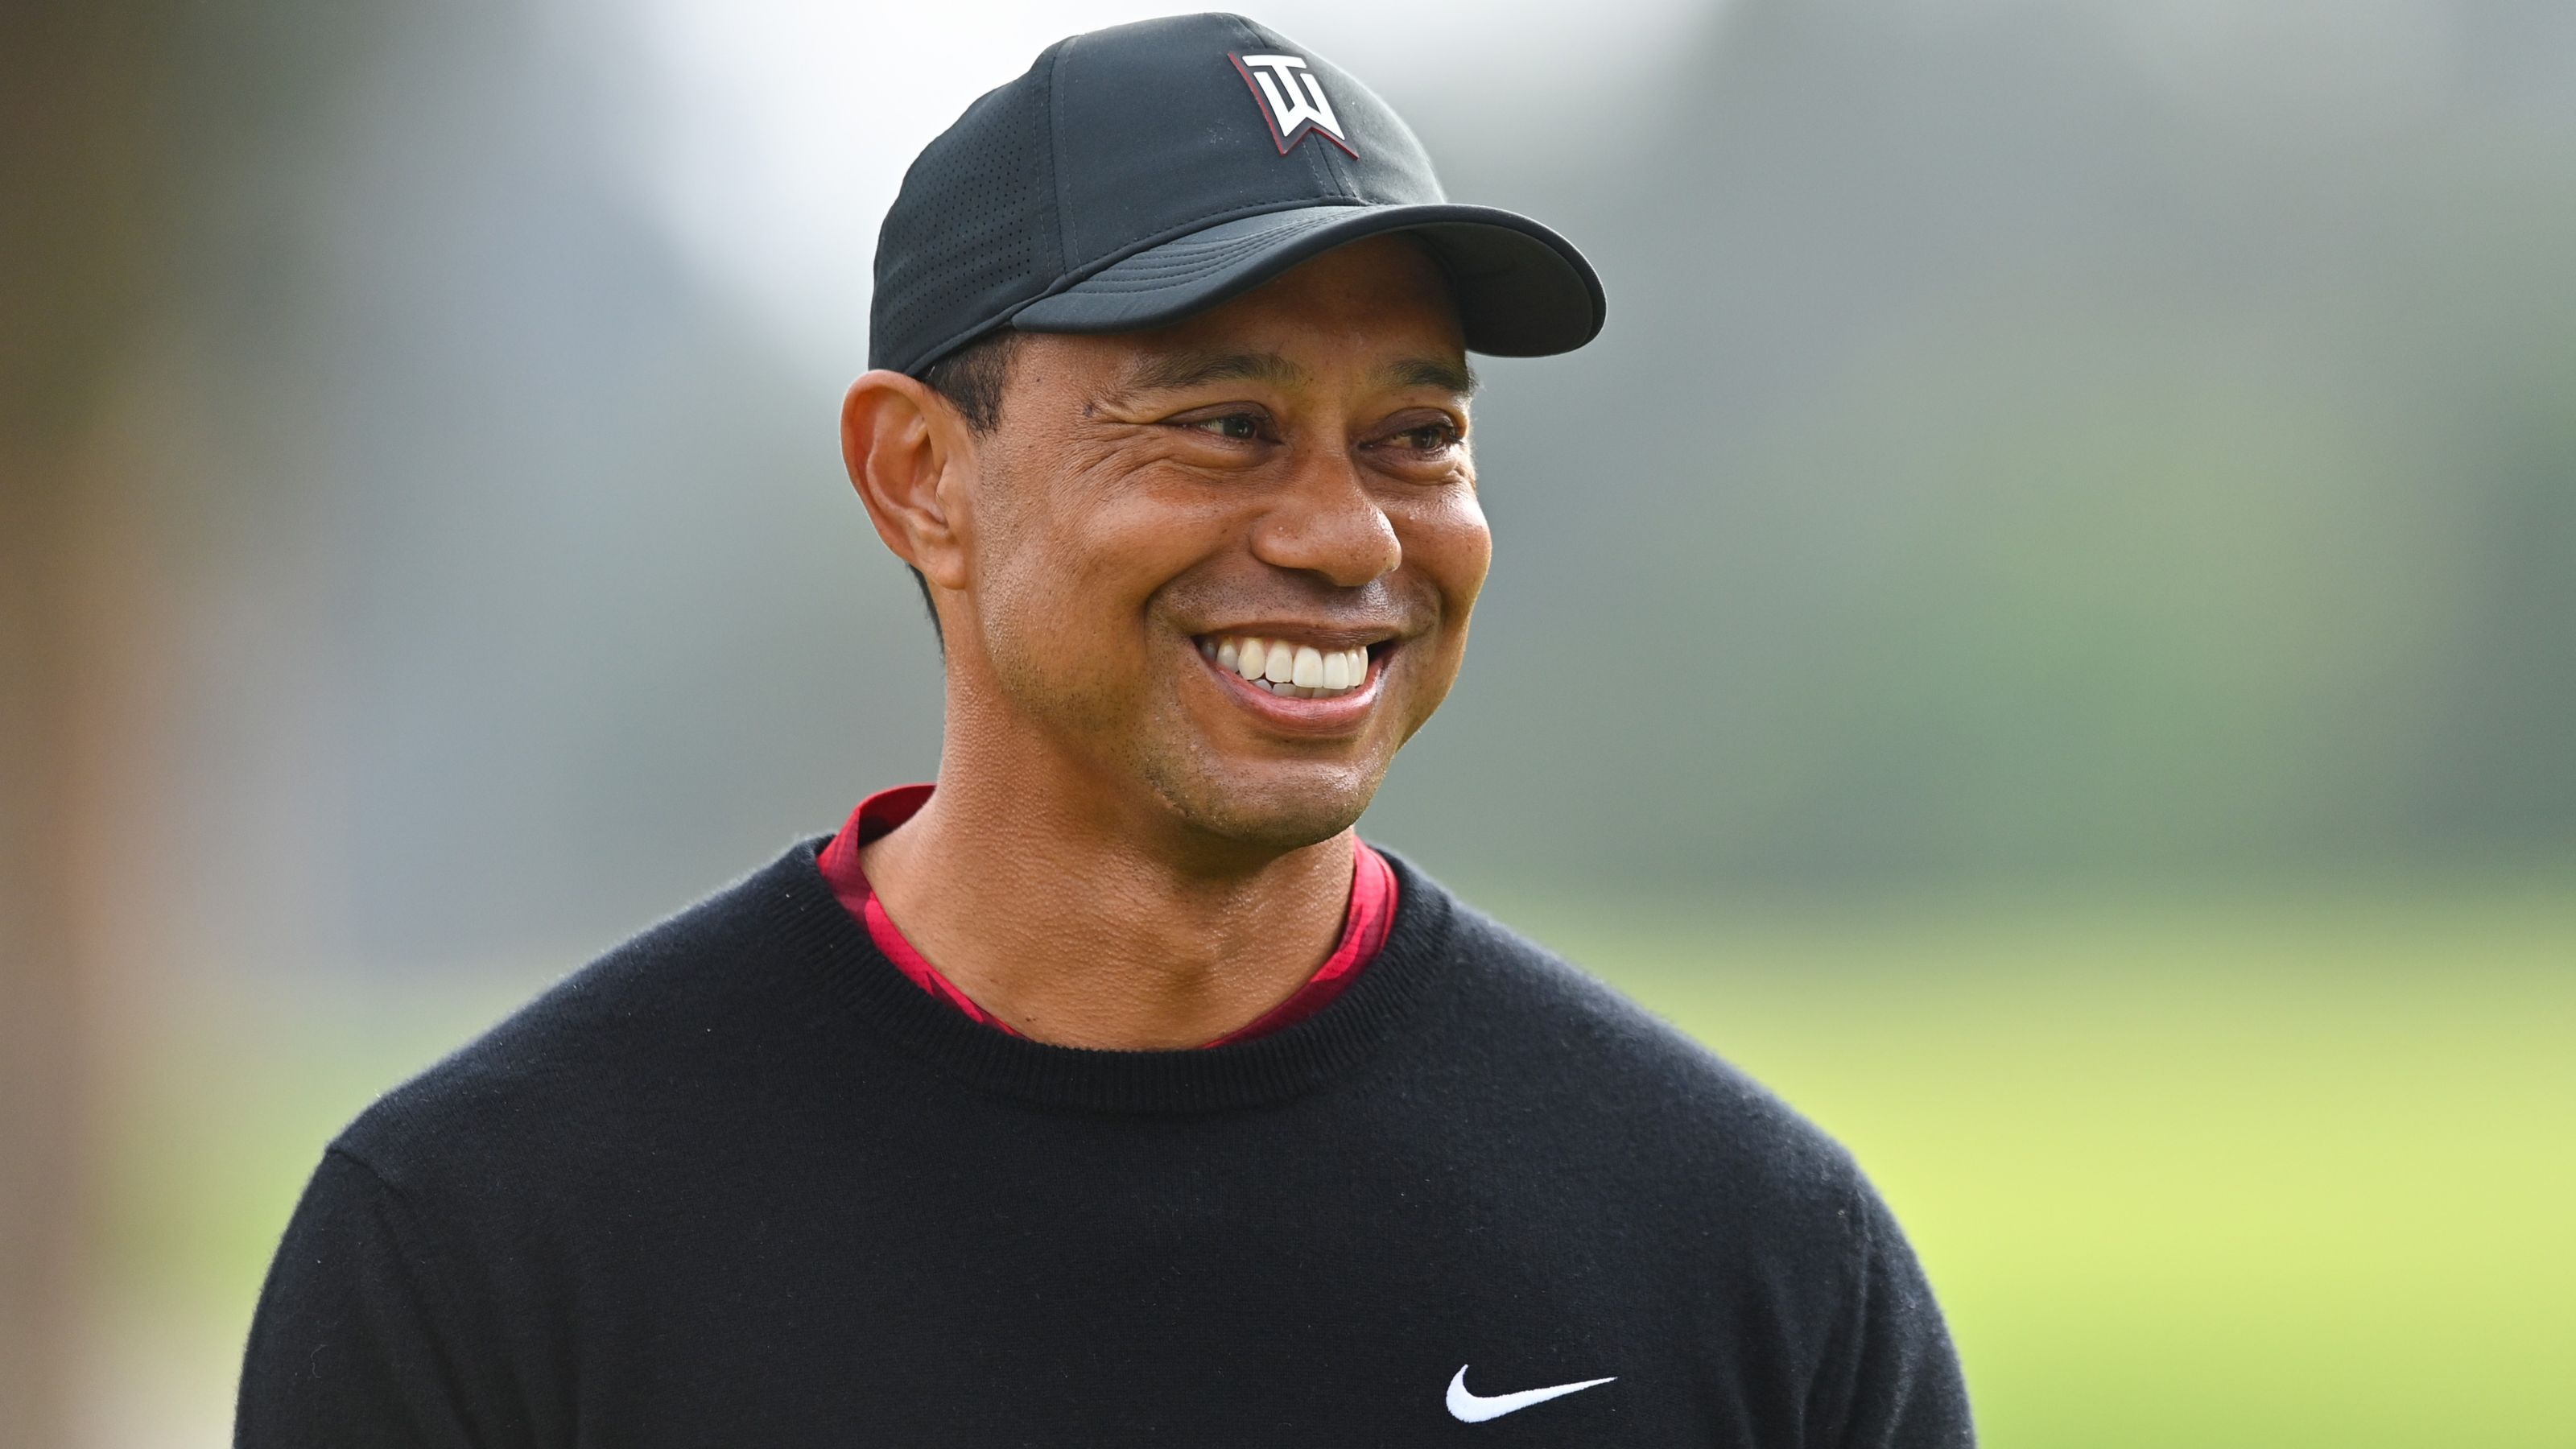 ... Tiger Woods © Getty Images